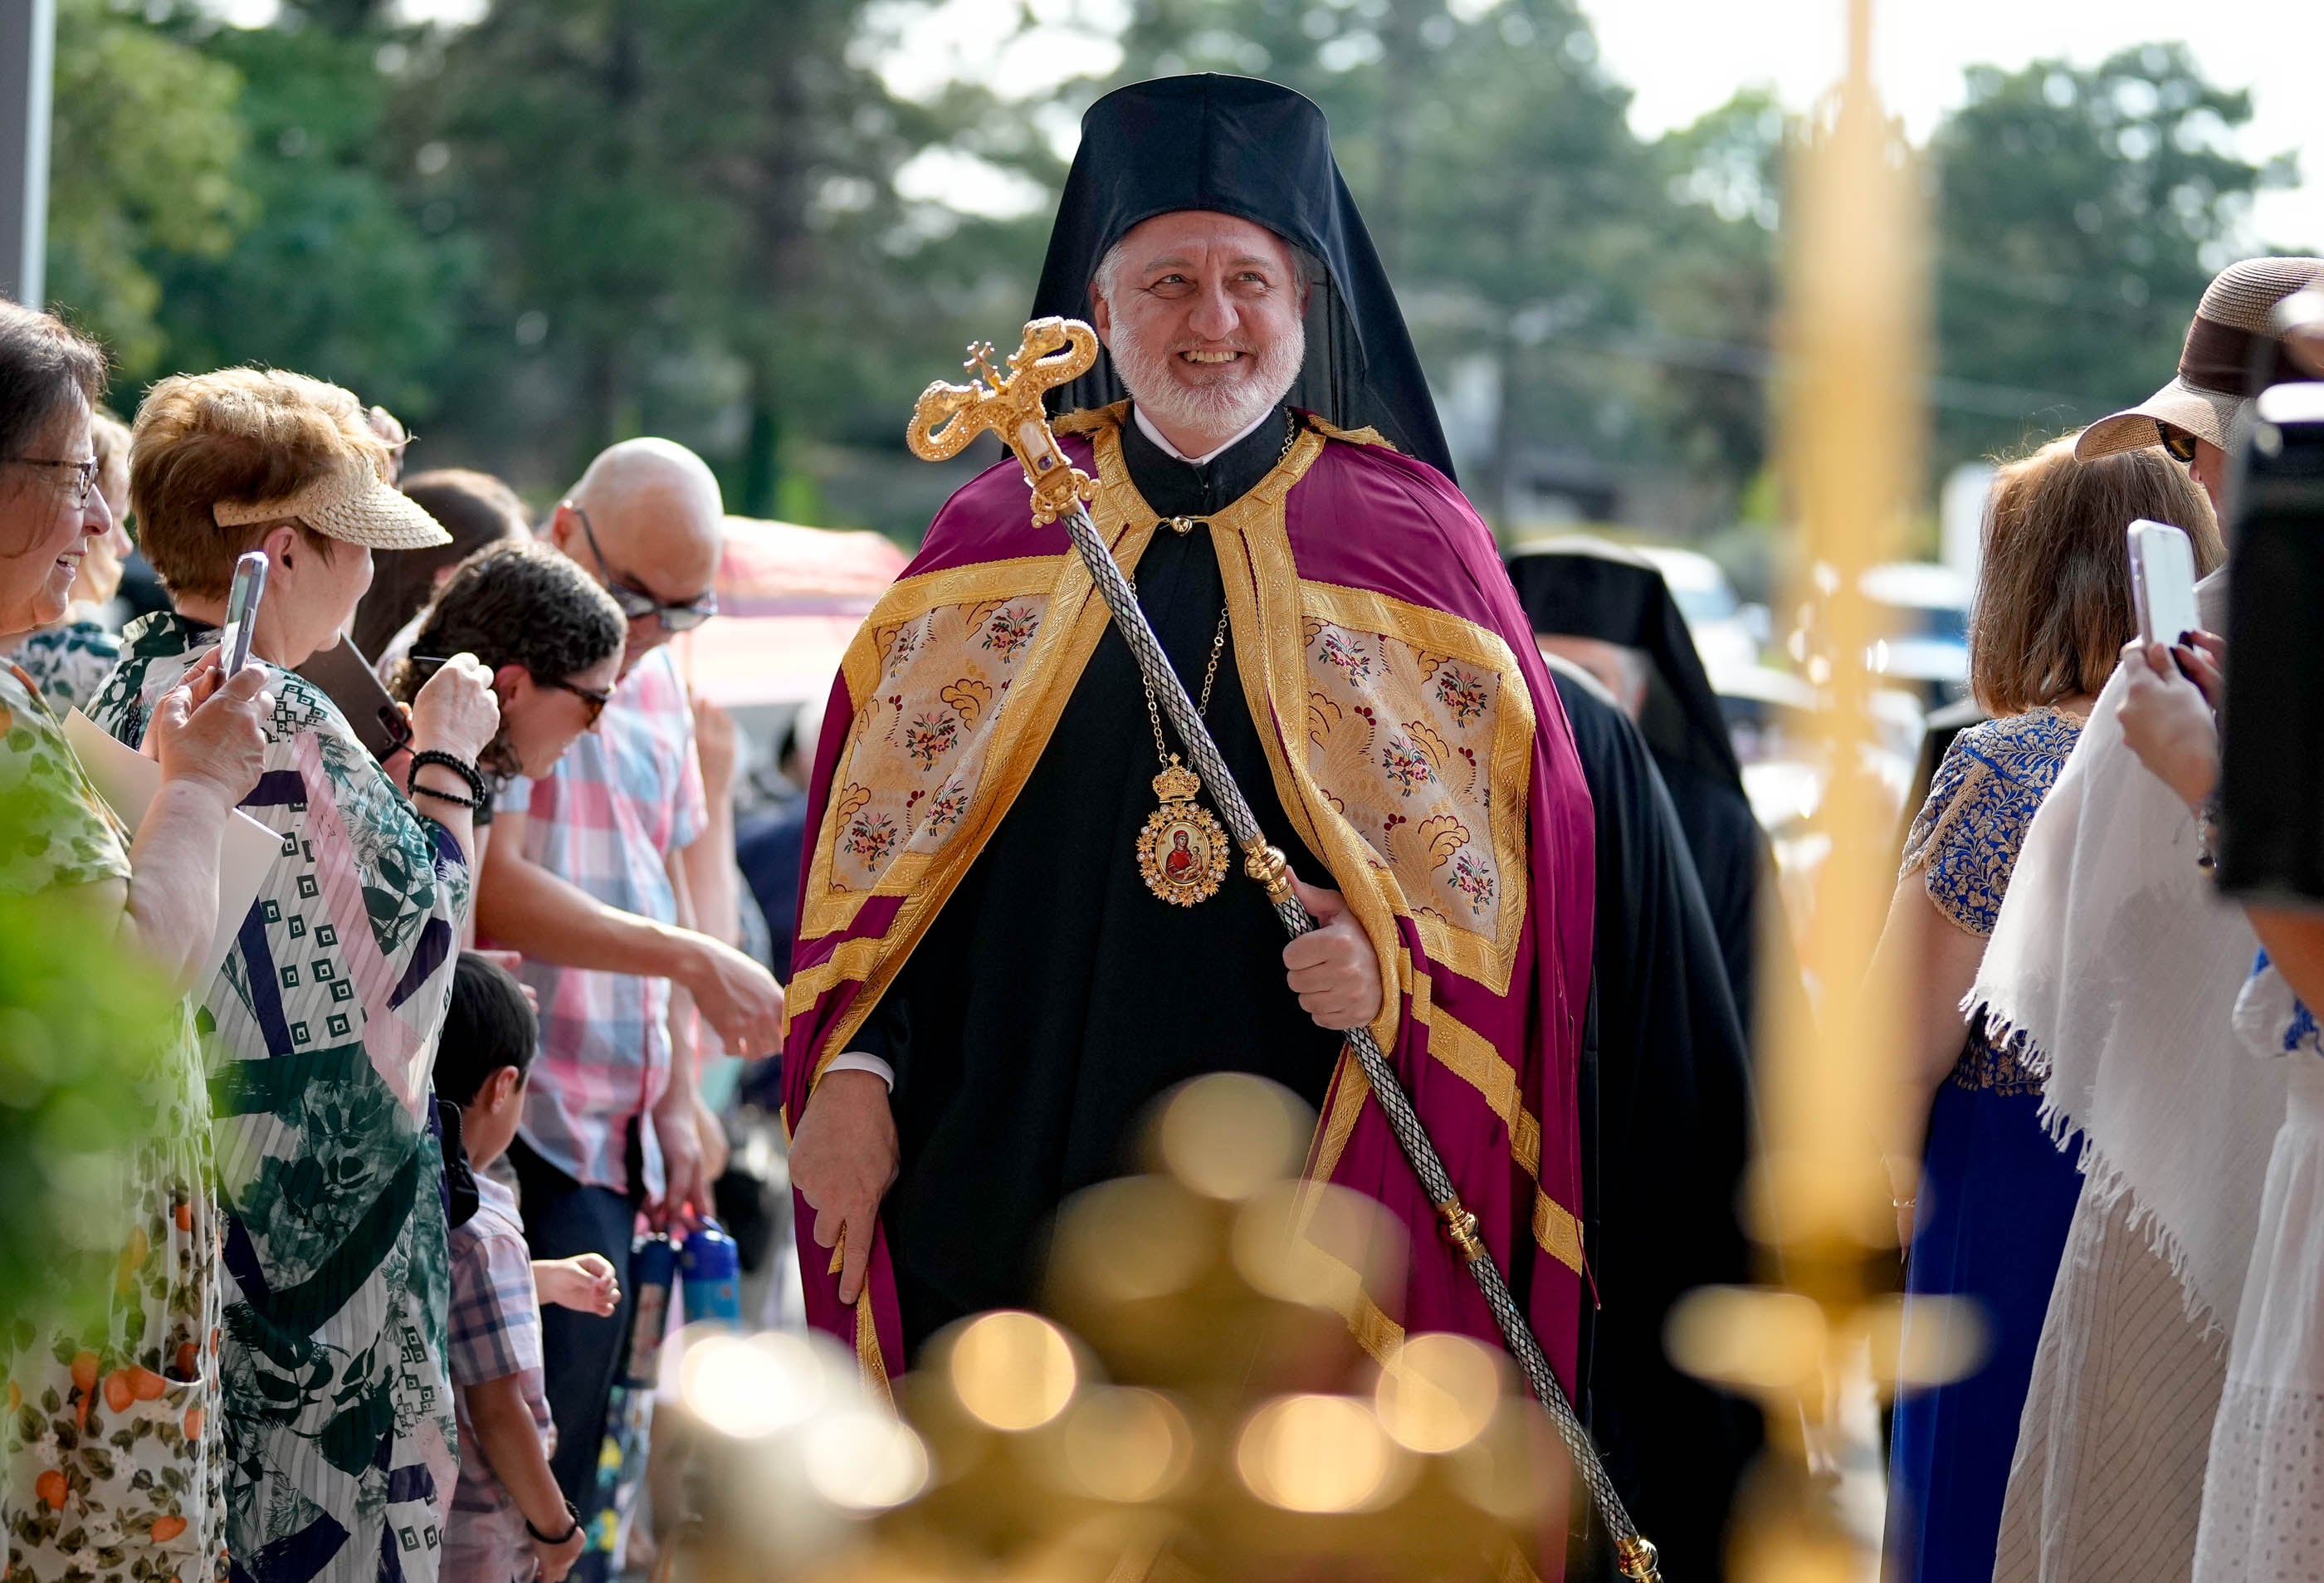 (Francisco Kjolseth | The Salt Lake Tribune) Archbishop Elpidophoros of America arrives at St. Anna Greek Orthodox Church in Sandy for opening services on Saturday, July 13, 2024, at the new church that was transformed from a garden center into a sacred sanctuary.